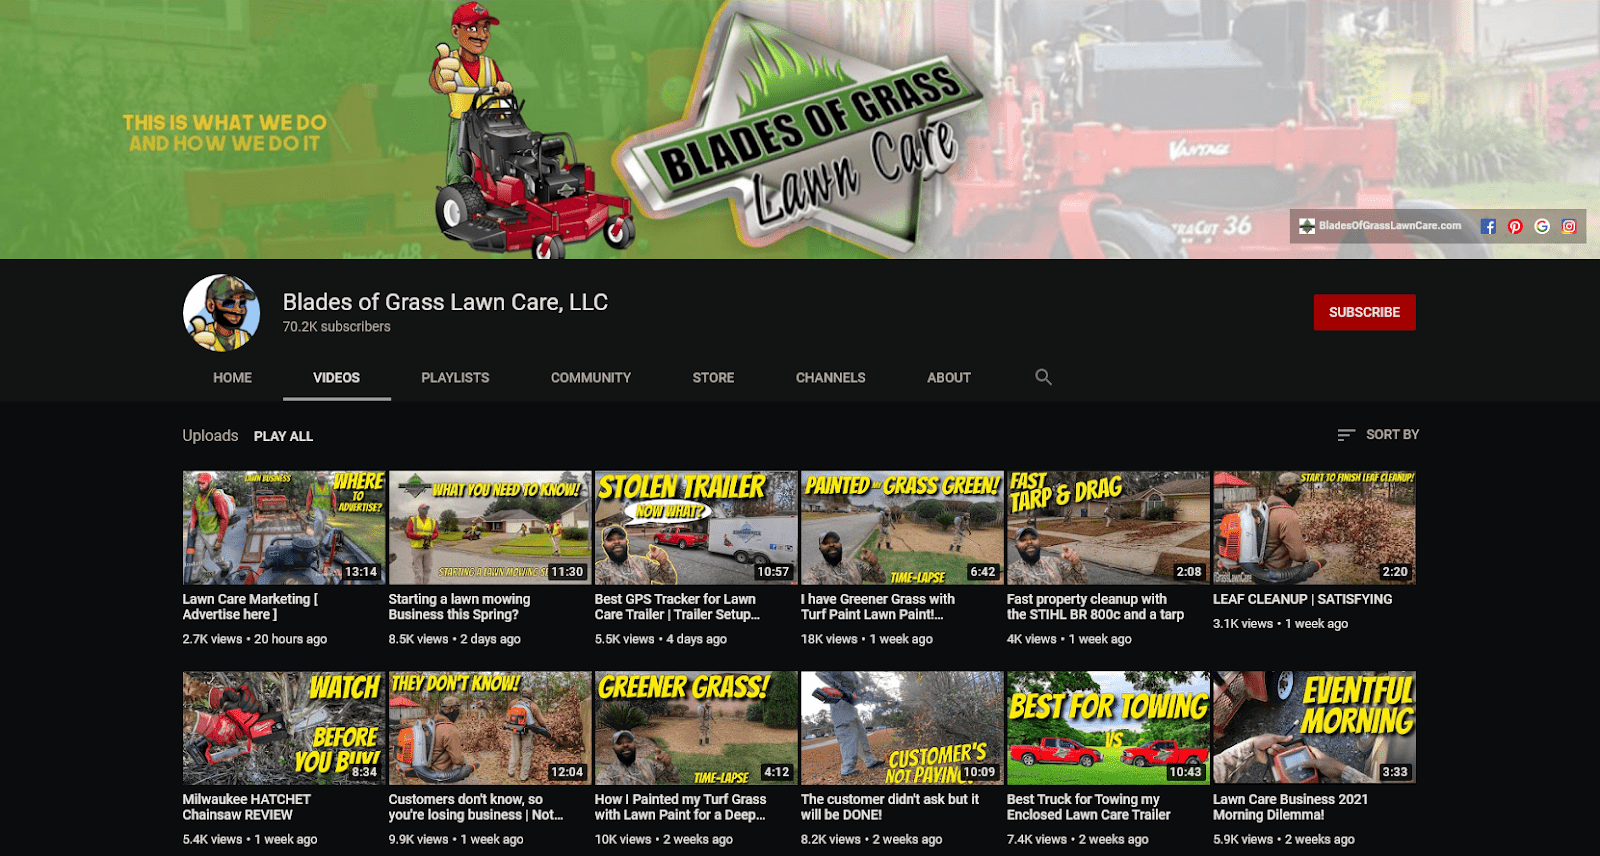 top notch lawn care youtube